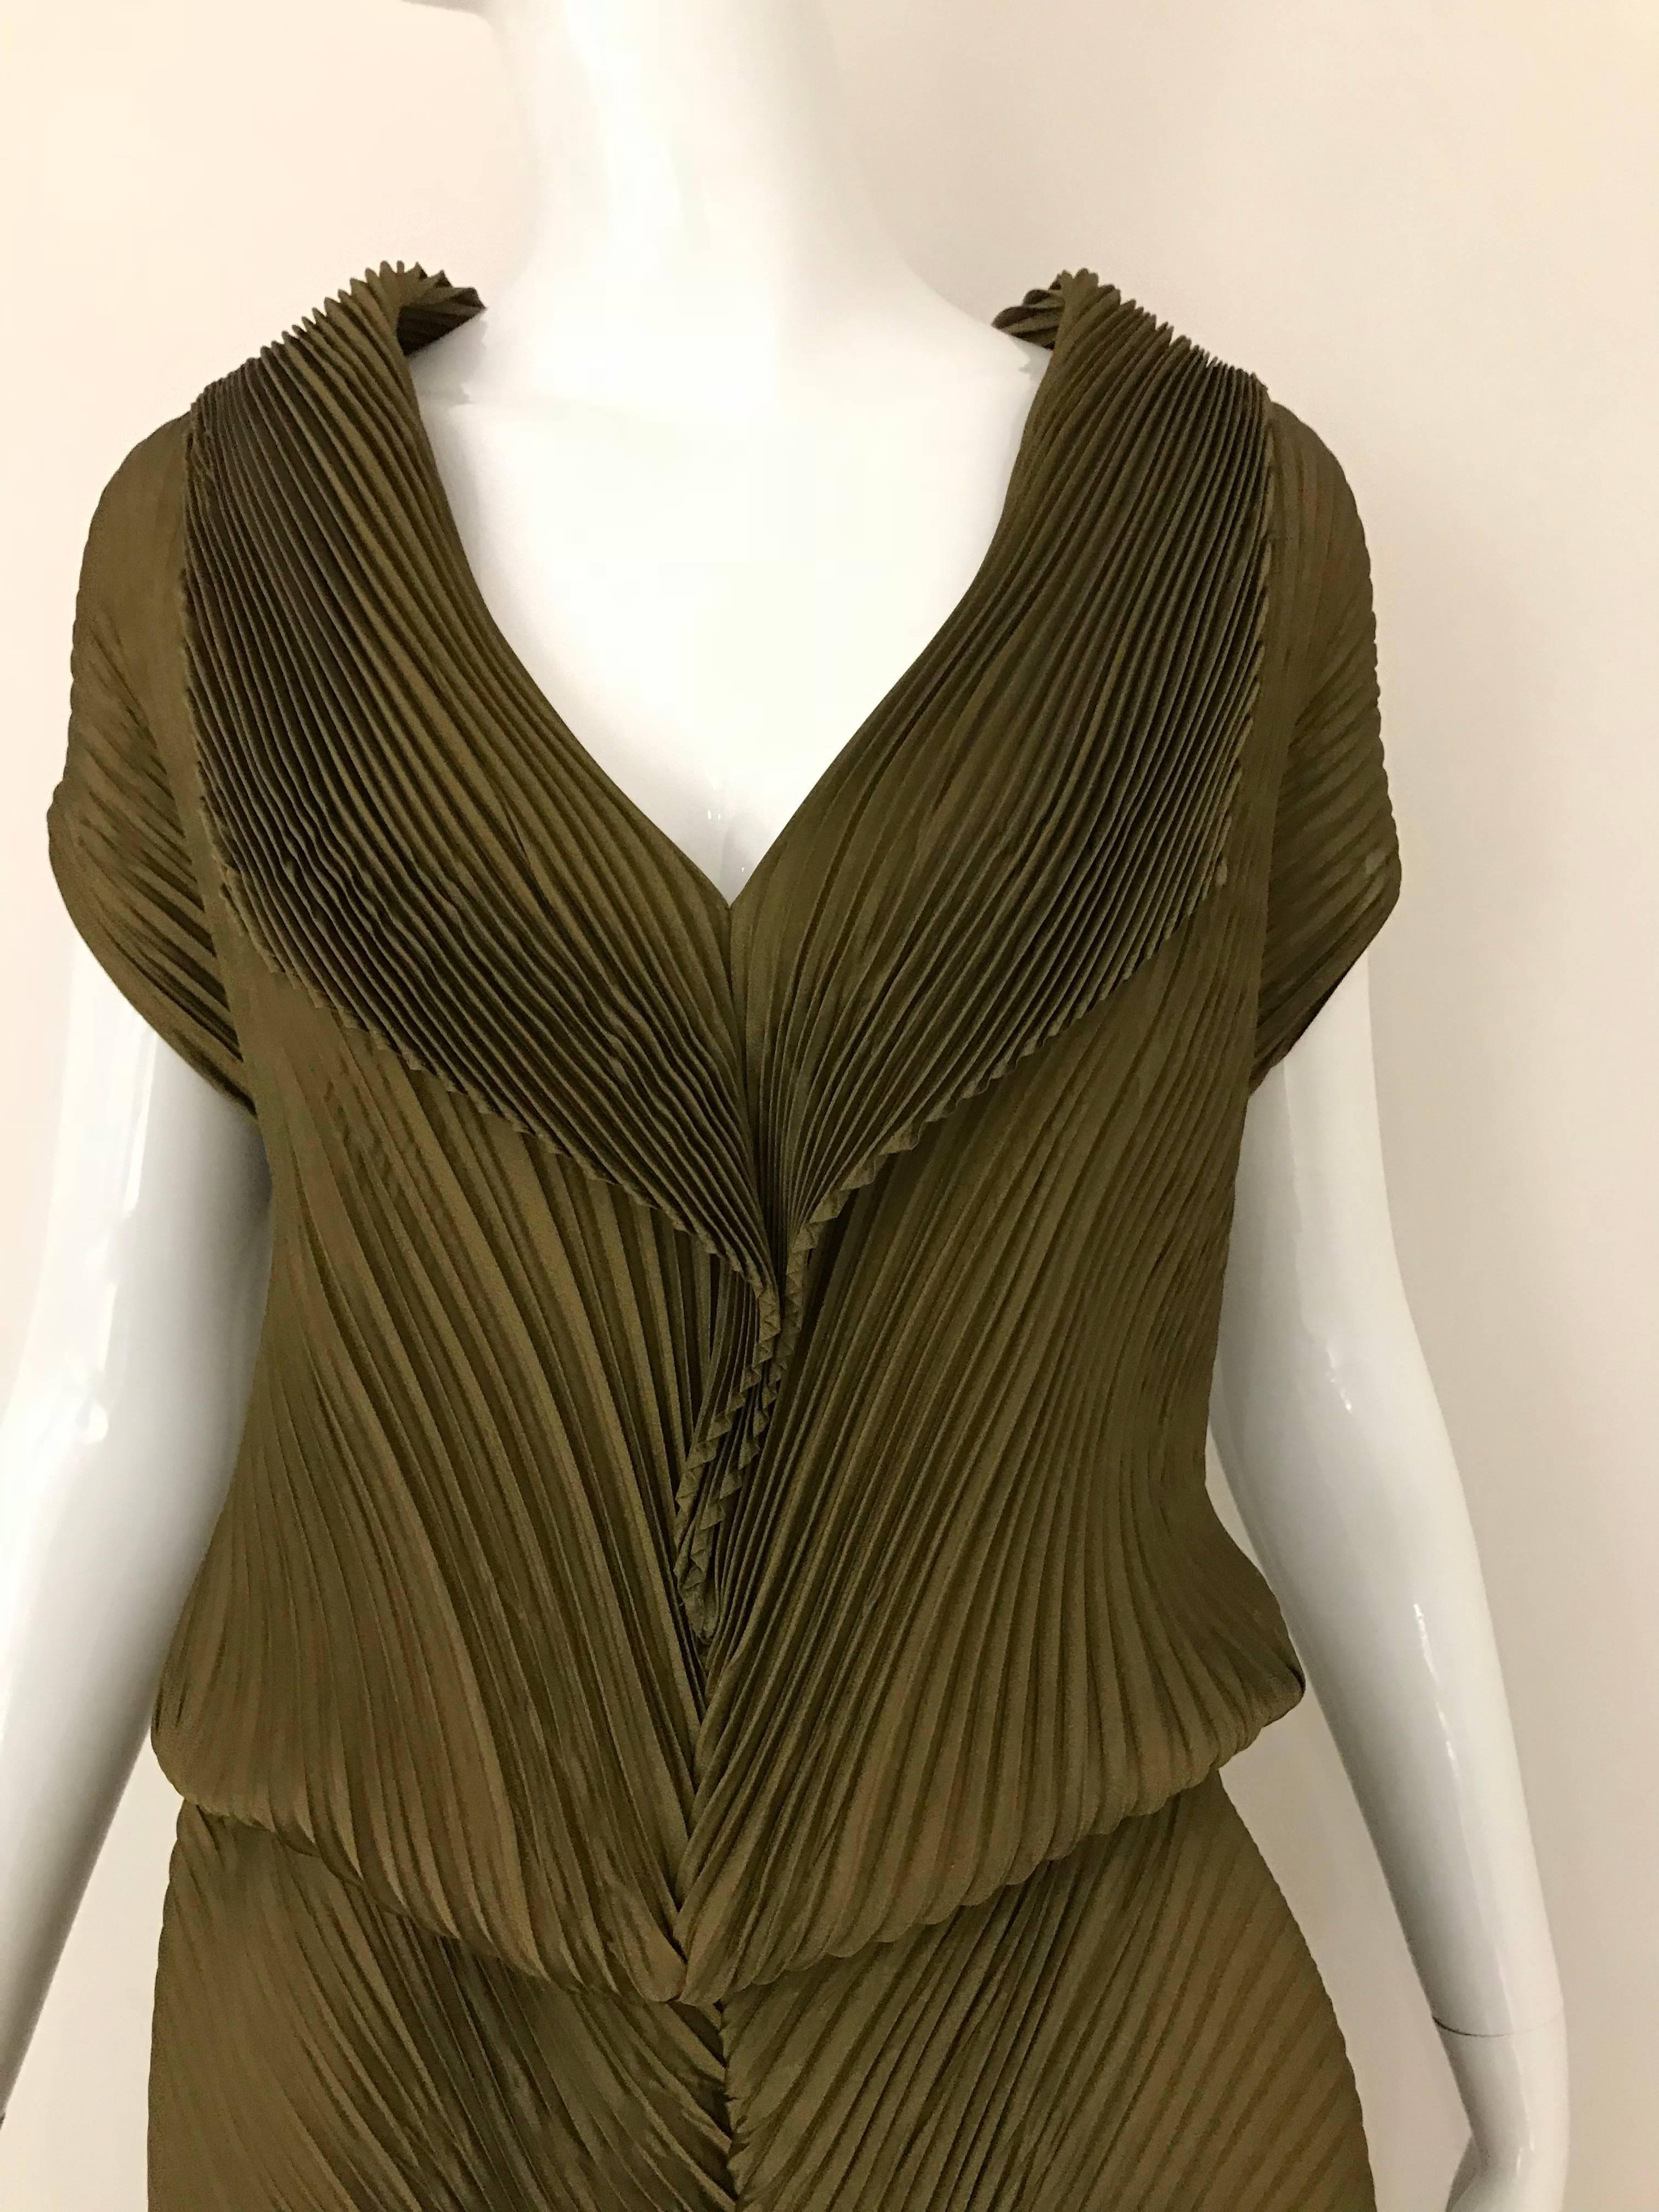 1990s ISSEY MIYAKE Metallic brownish Green Pleats Dress with architectural collar. Dress comes with sash. no zipper. 
Fit size 4/6/8/10 Small to Medium

Shoulder : 17”
B: 42”
W: 42”
H: 42”
L: 43” (front)
L: 57 1/2” (back)